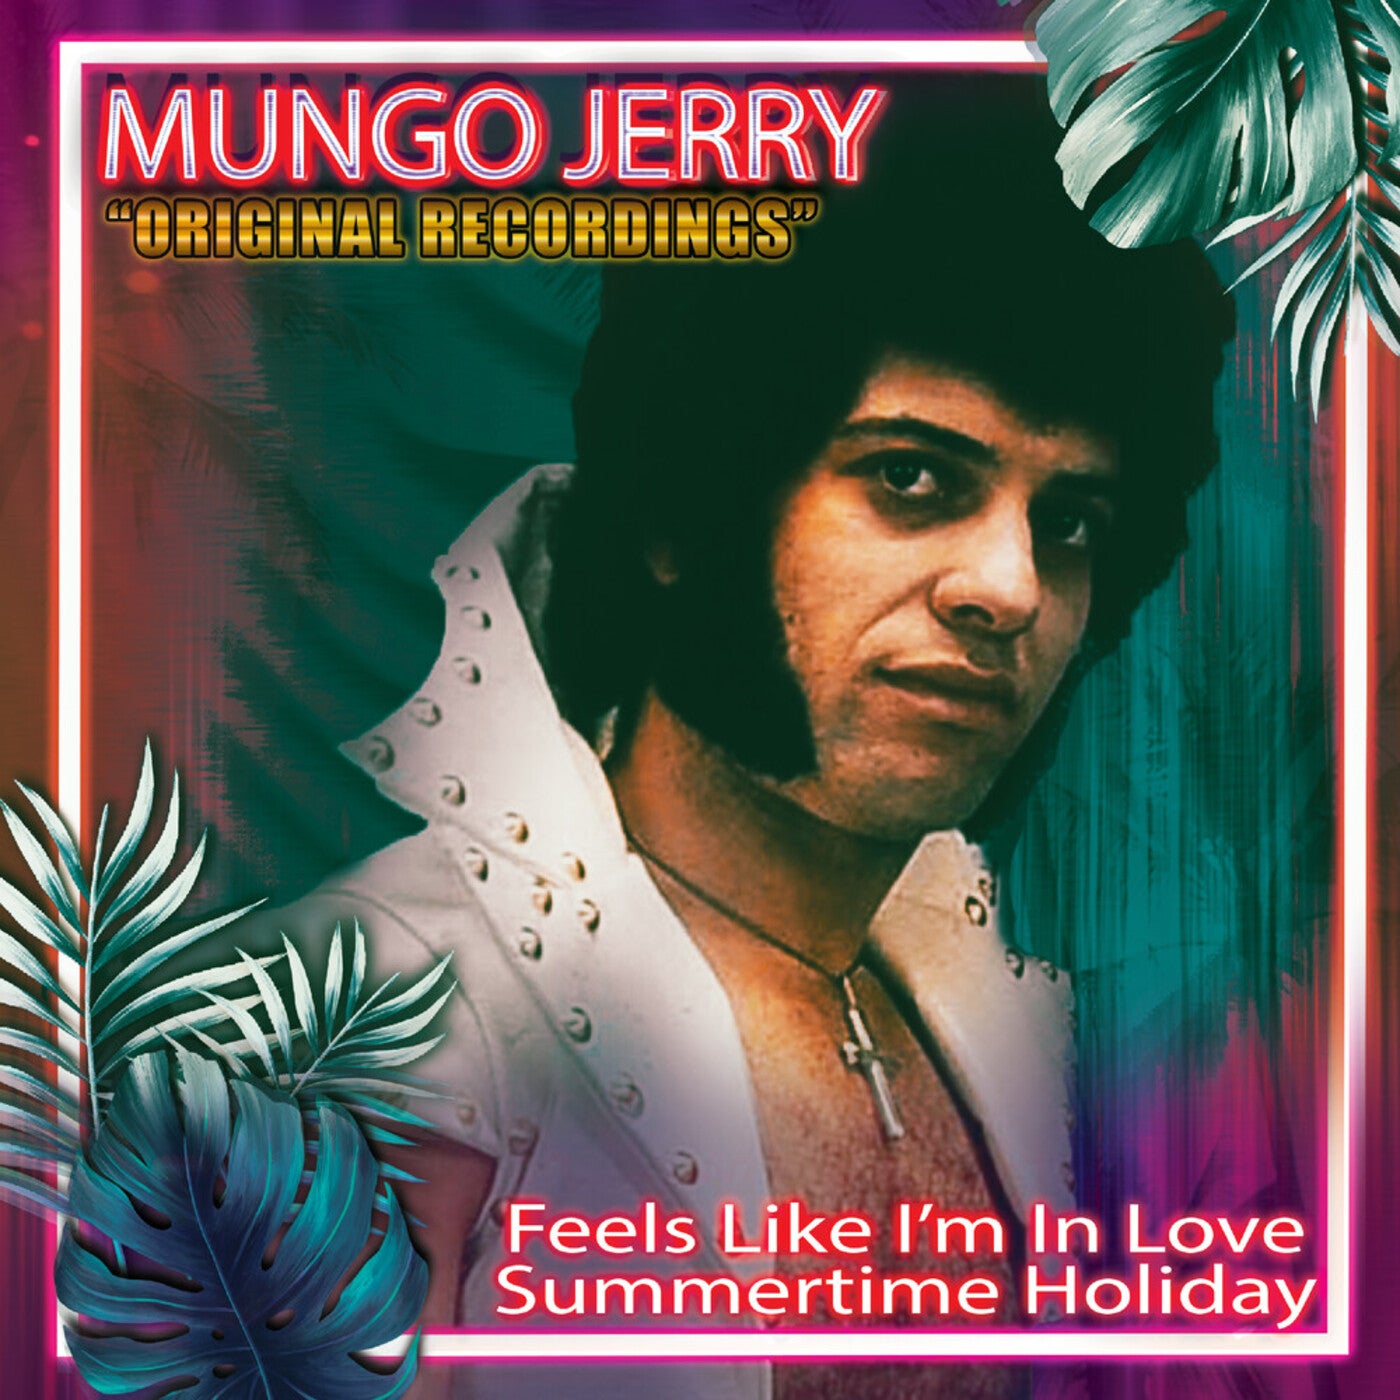 Mungo jerry in the summertime. Mungo Jerry.